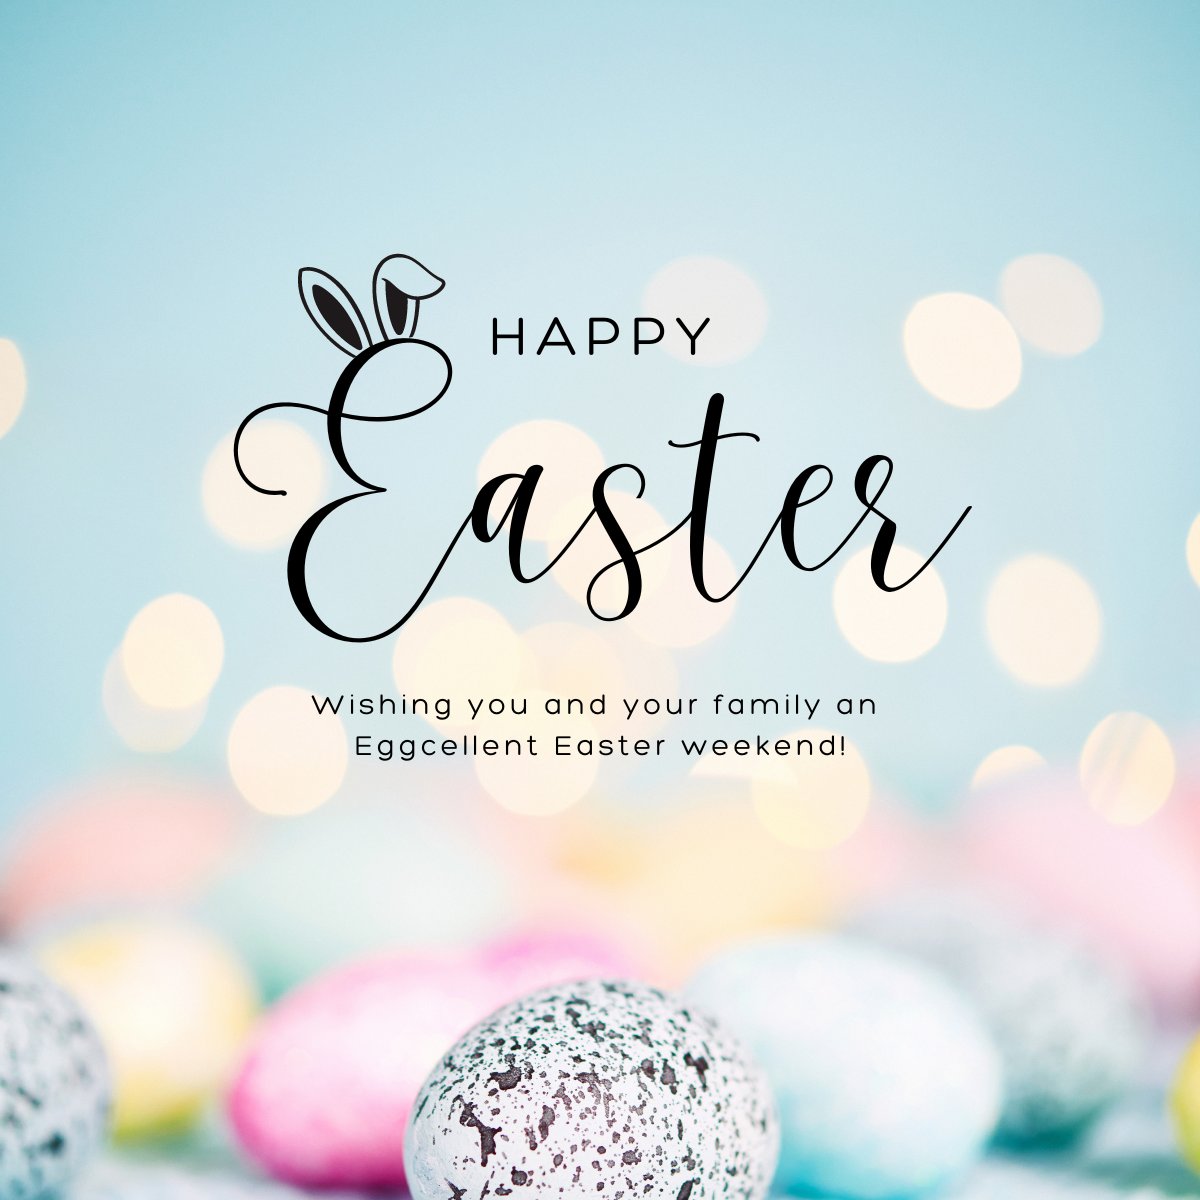 Spring is in the air just in time for Easter. 🌸 Wishing you and your family a hoppy Easter and may all your chocolate bunnies be solid. 🍫 🐰 In observance of the holiday, our sales centers/model homes will be closed this Sunday, April 9th.bit.ly/43cRTVC #Easter2023